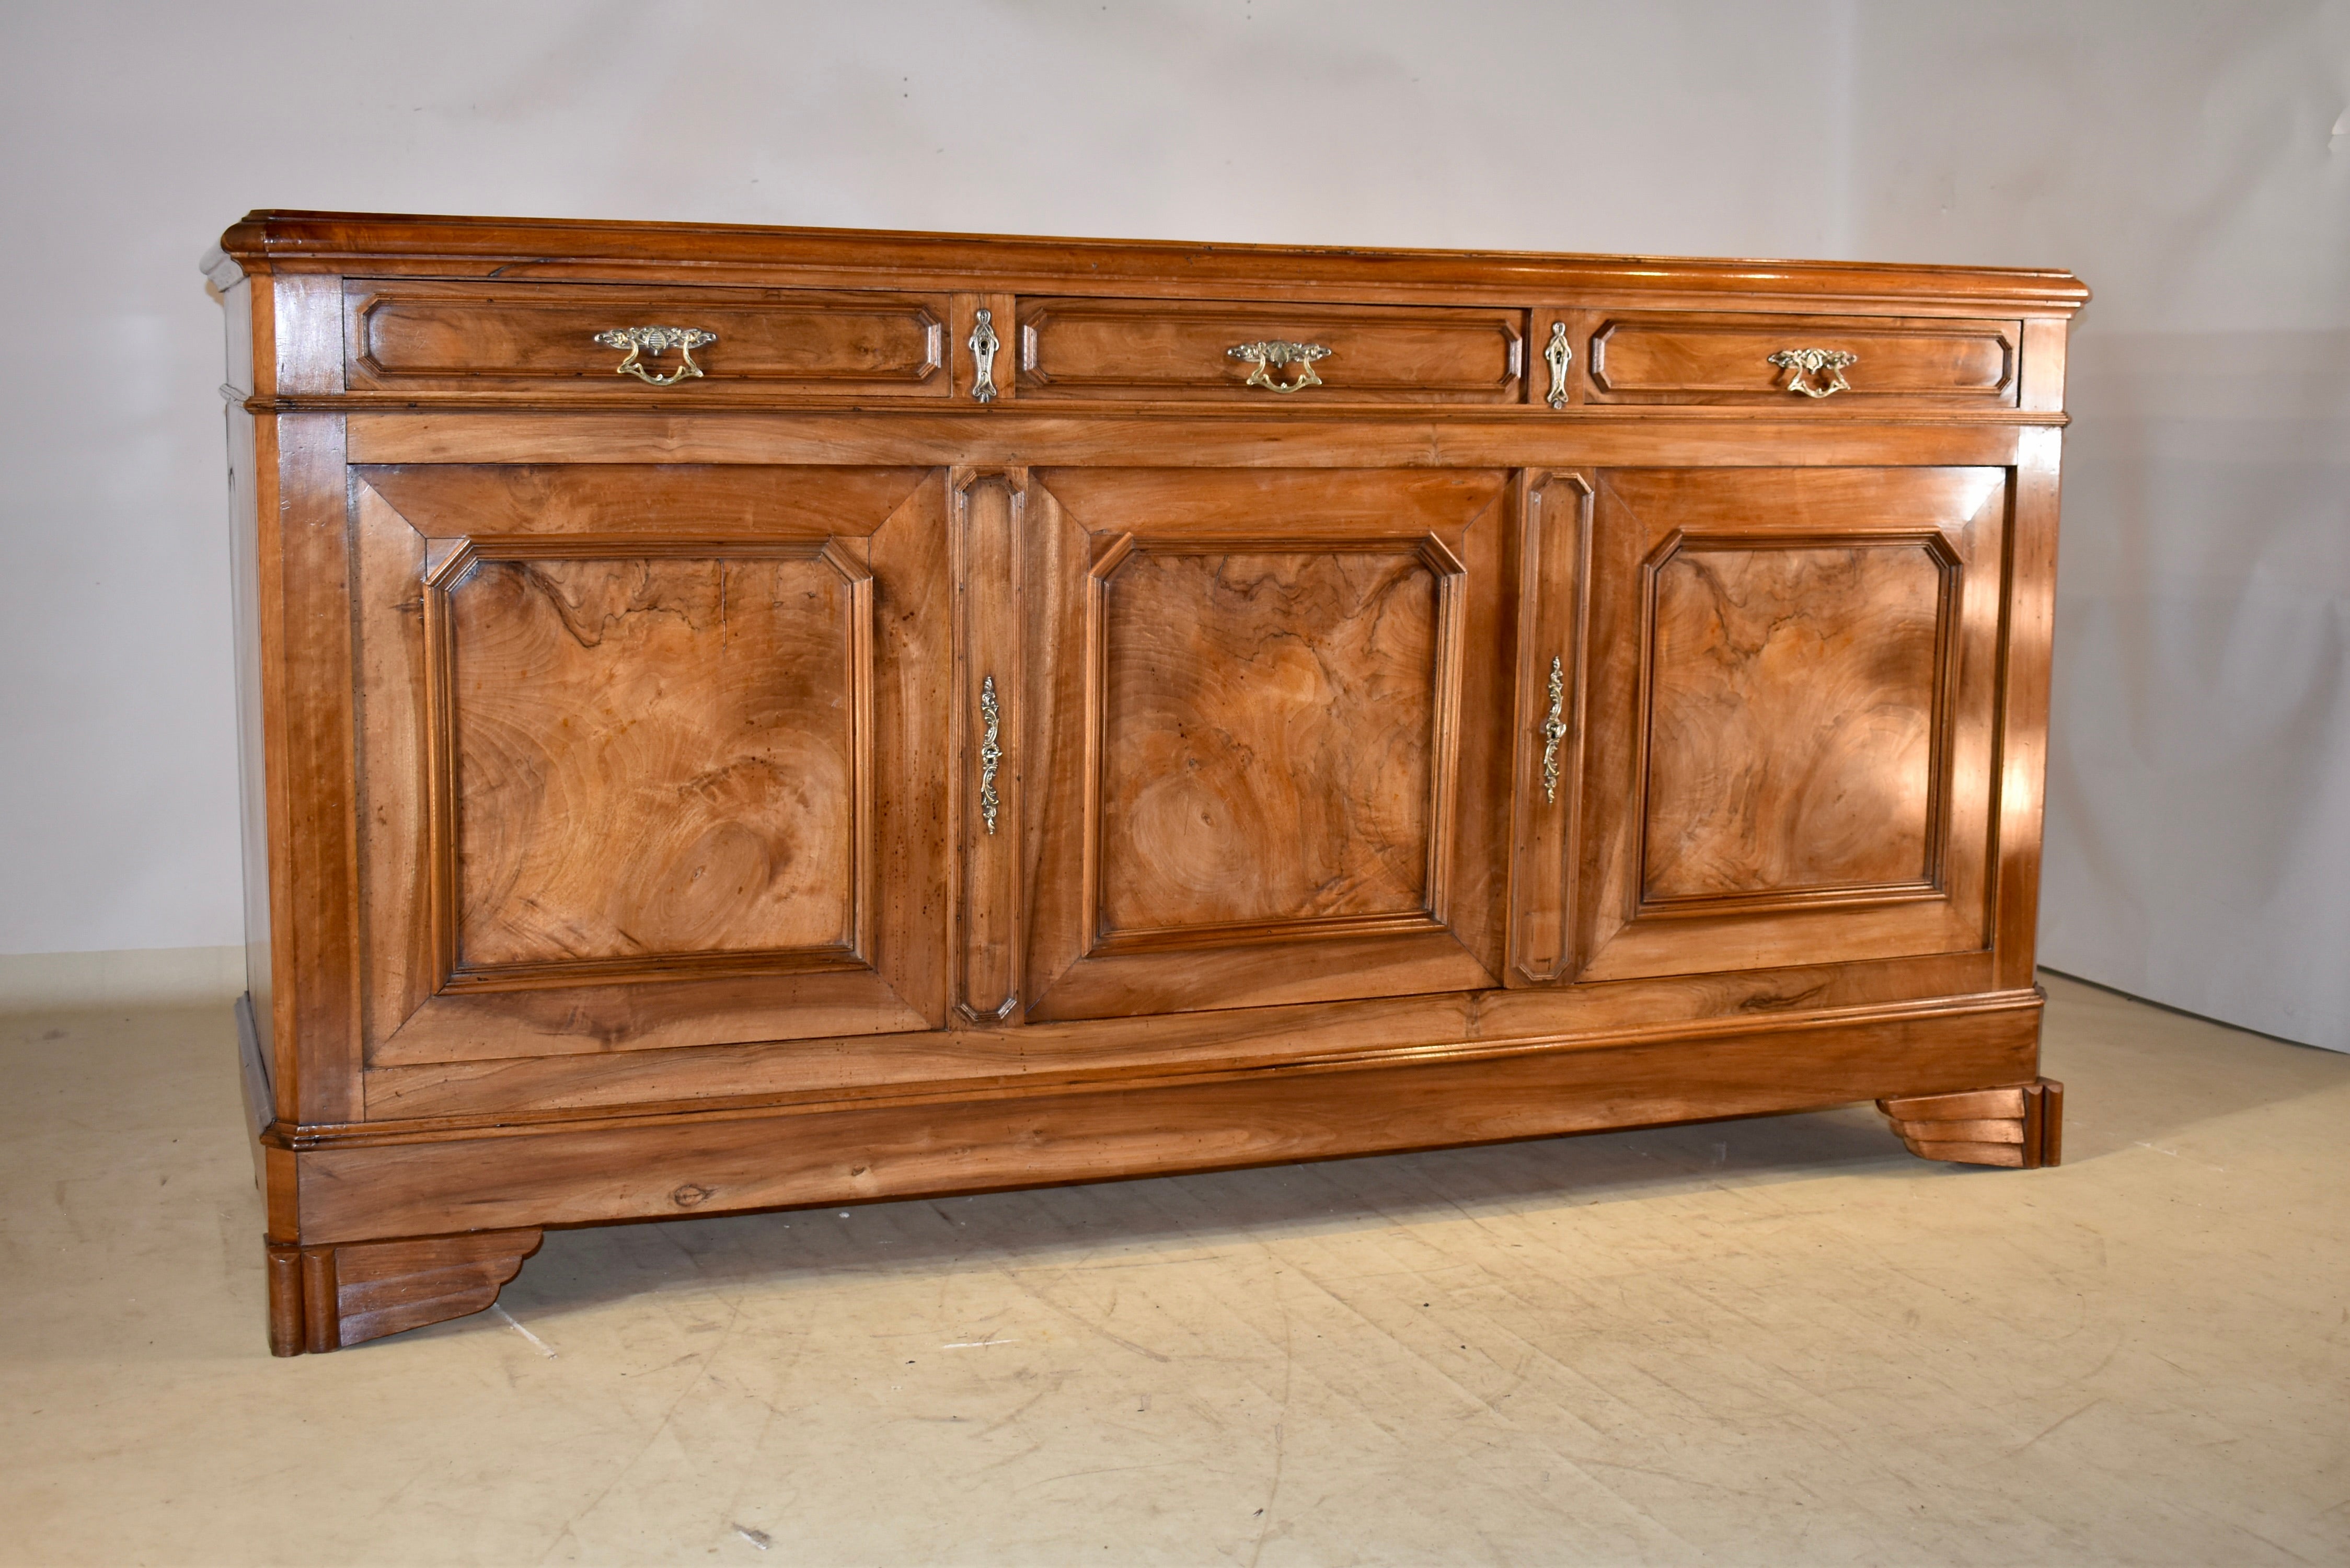 19th century walnut enfilade from France.  This entire piece is made from the most exquisitely grained and burl walnut timber we have had the pleasure to see!  The top is miraculously figured and makes a statement all by itself.  The top has beveled